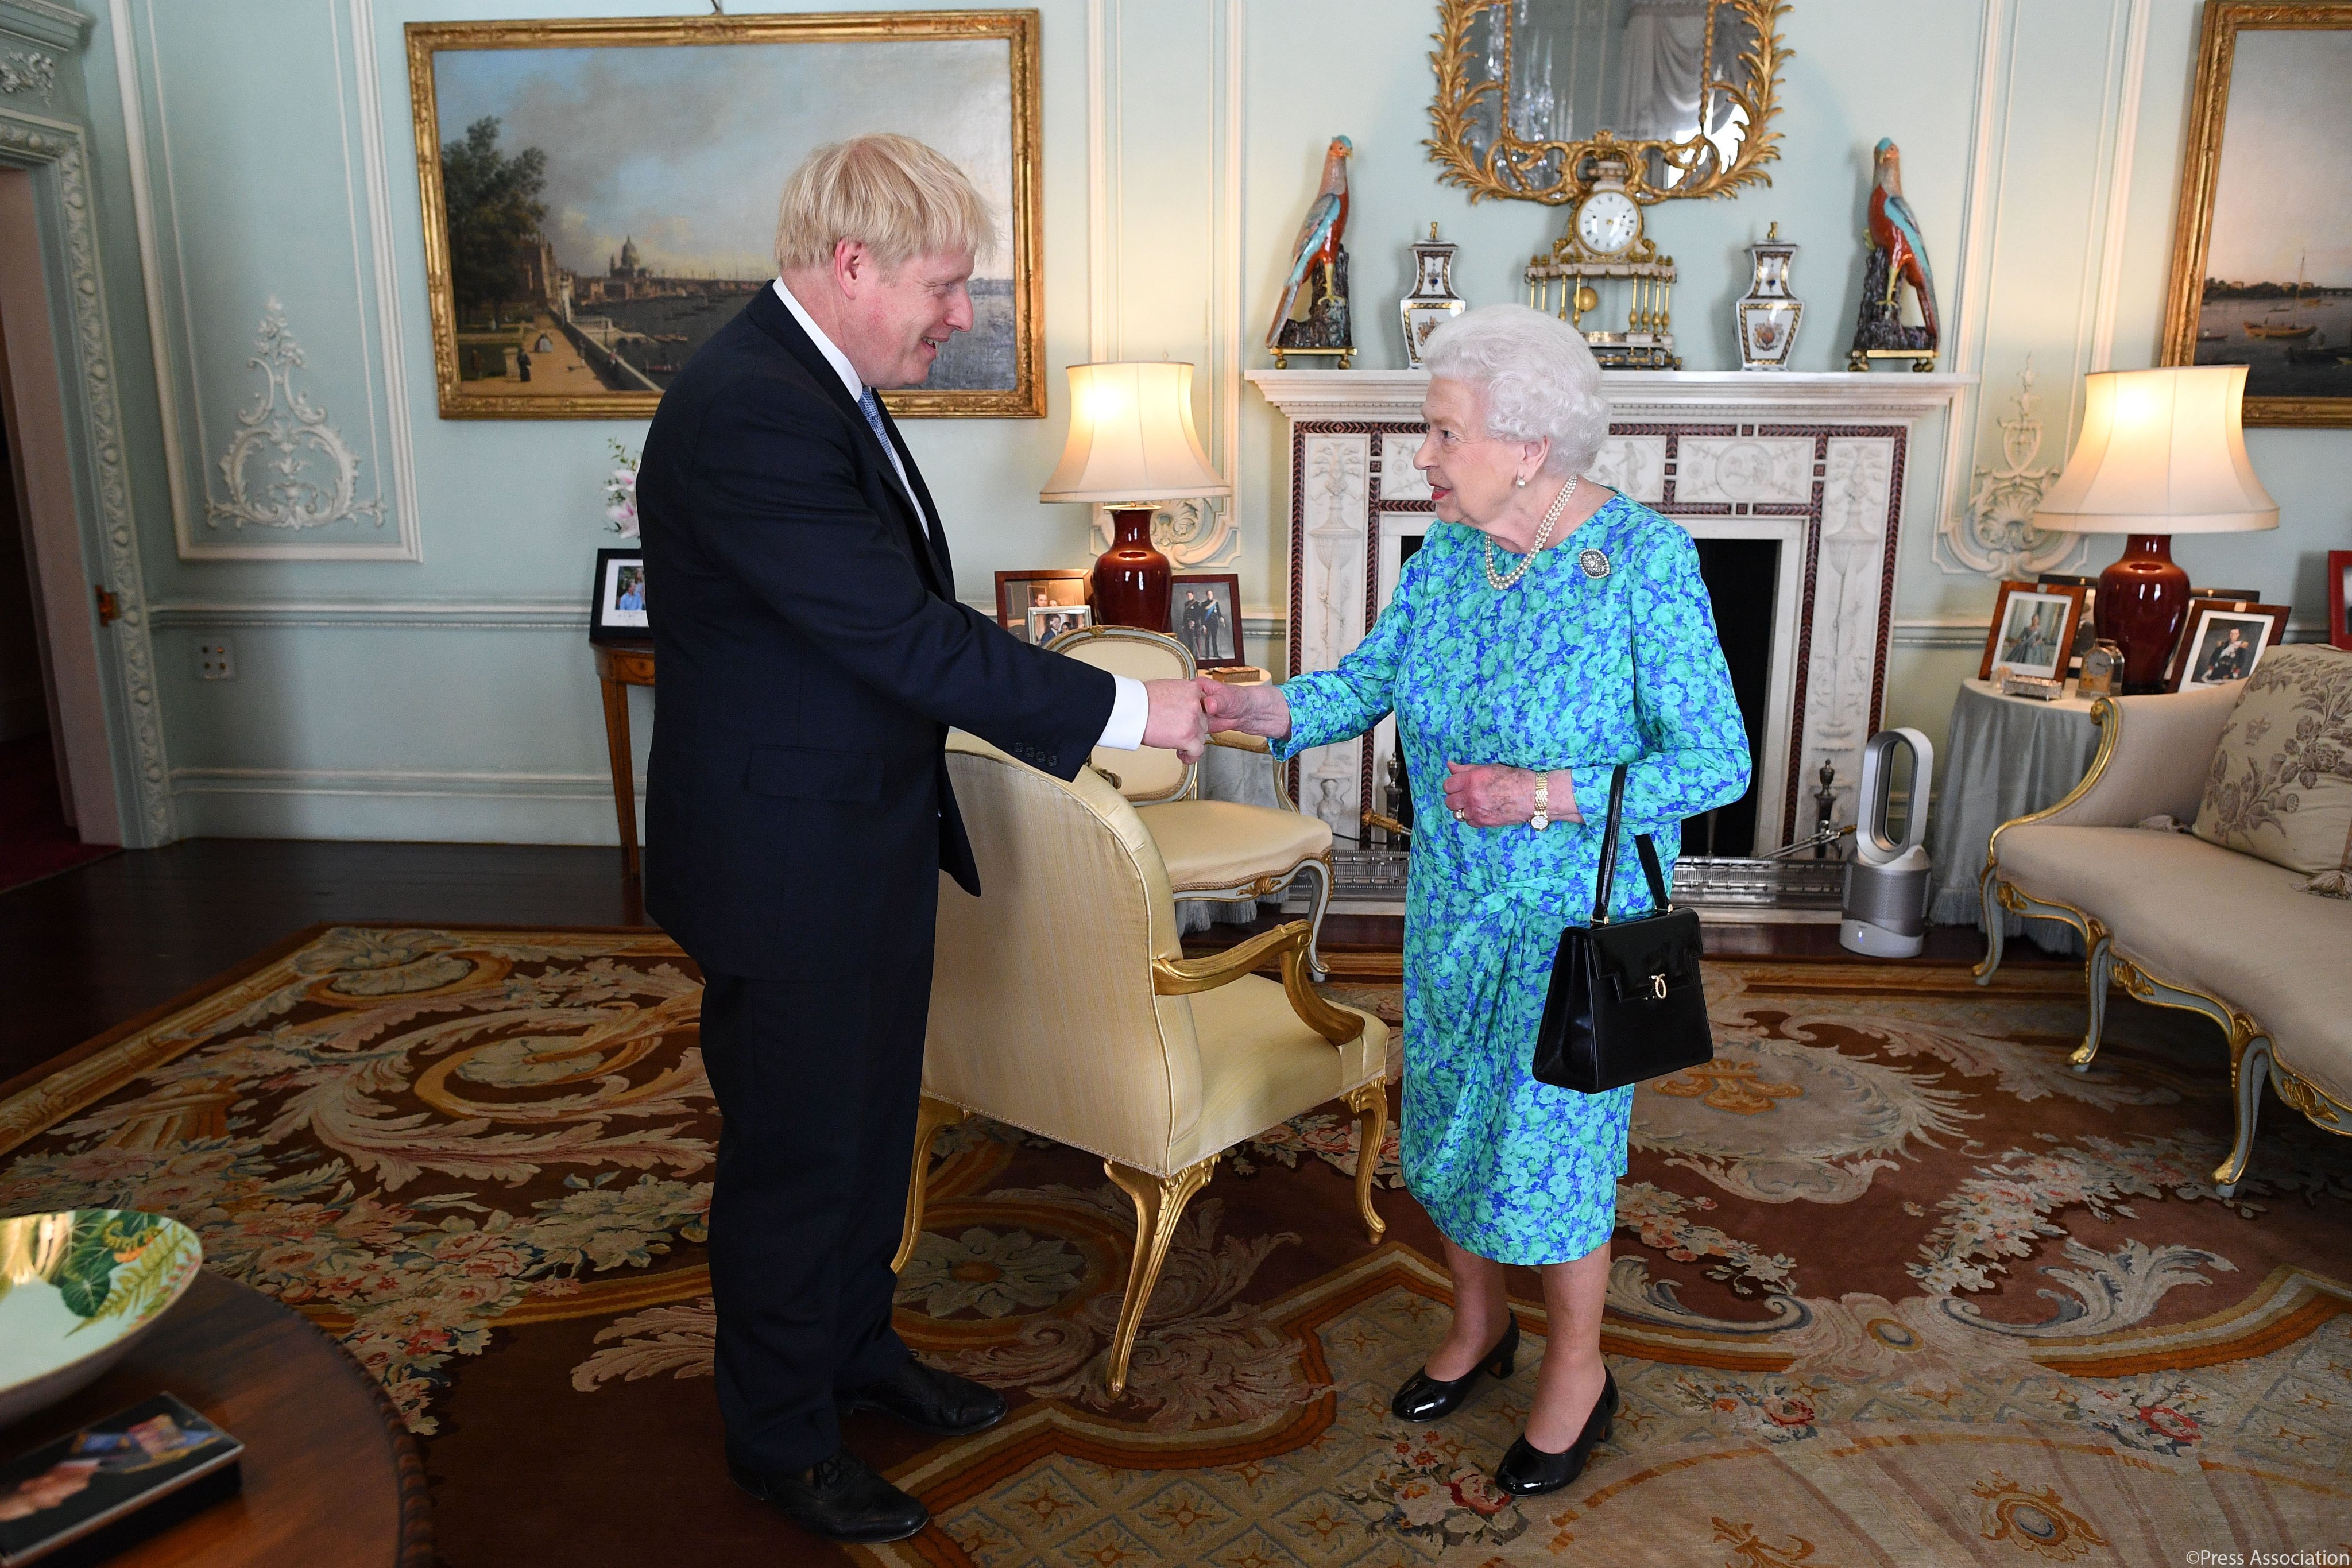 Buckingham Palace has confirmed that May has tendered her resignation and the Queen has officially requested that Johnson form a new administration. 